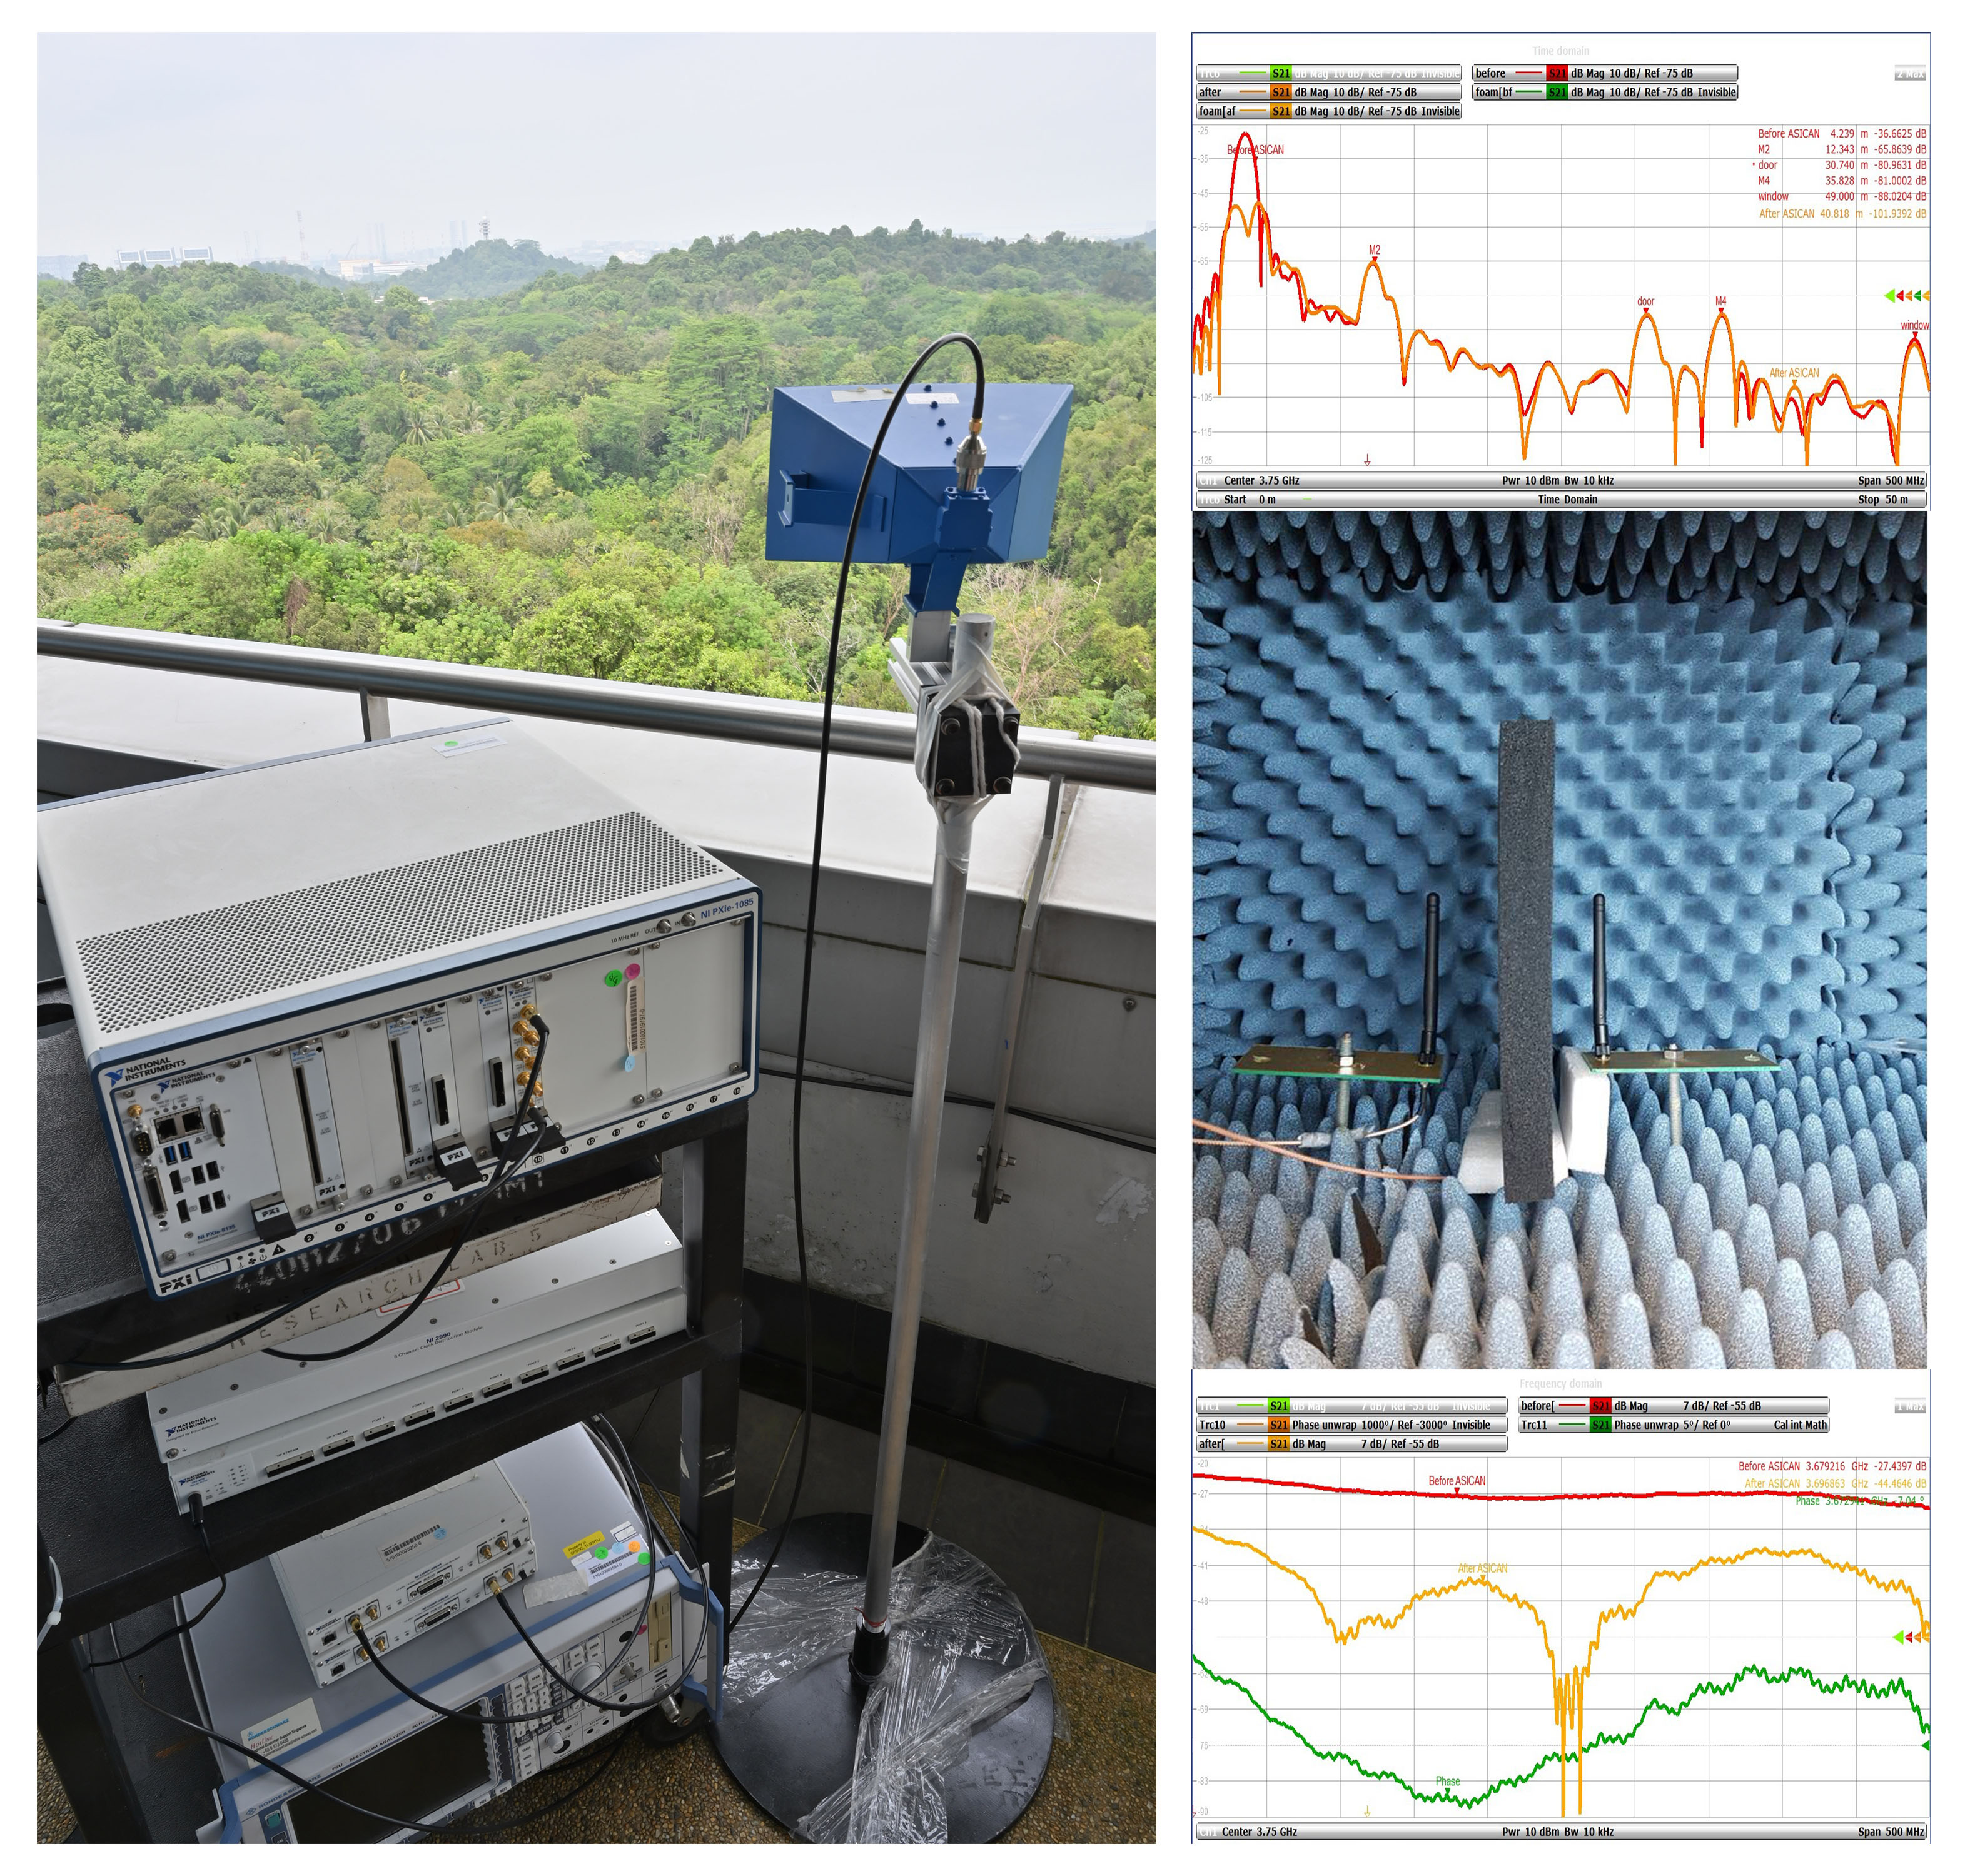 Performance measurement and validation of in-house developed communications signal processing systems, using test chambers and real-world environments. 